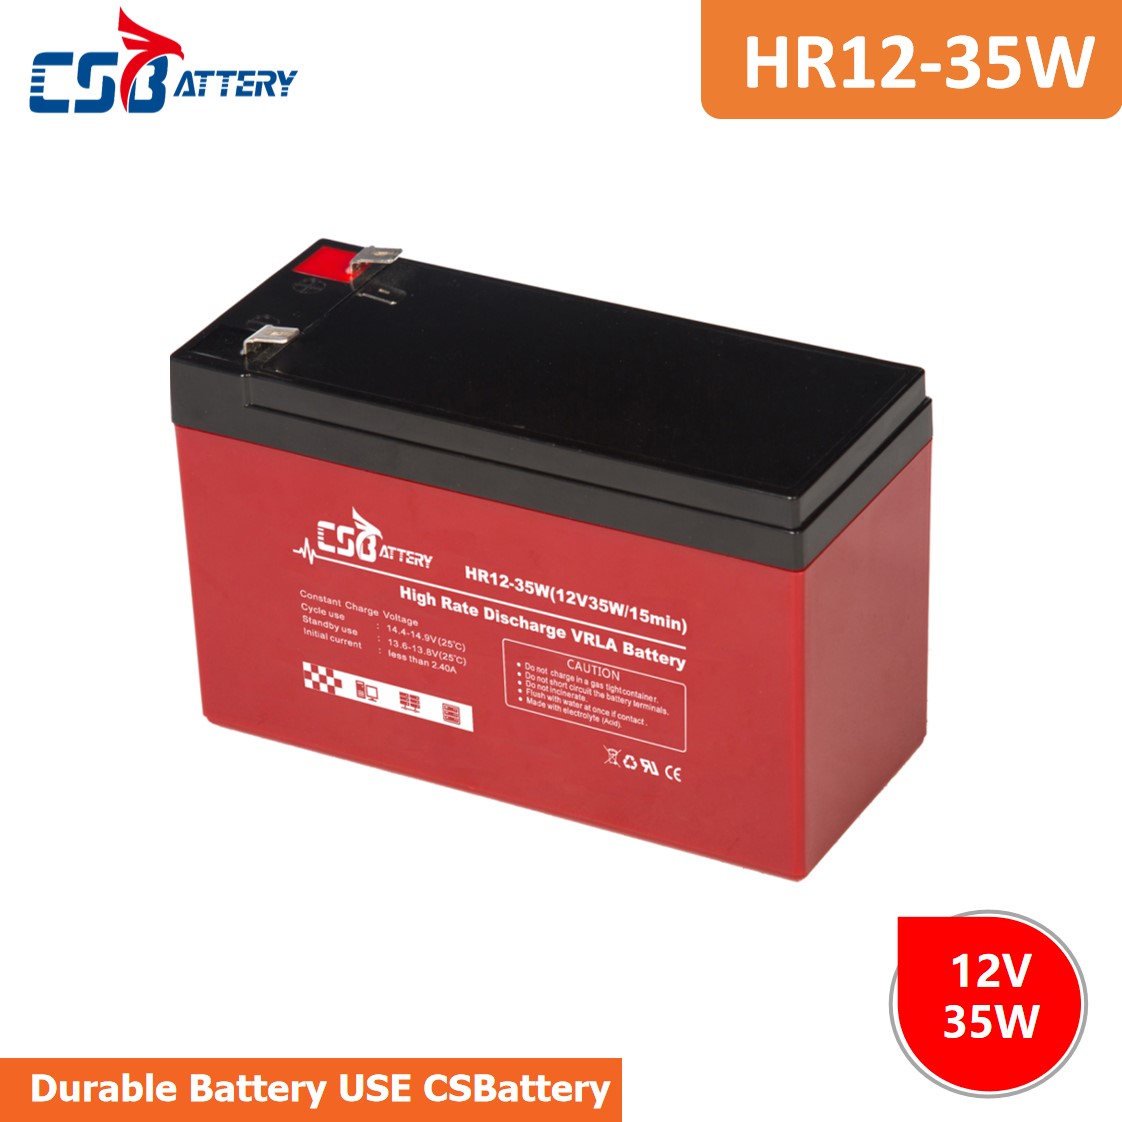 High Rate Discharged VRLA Batteries